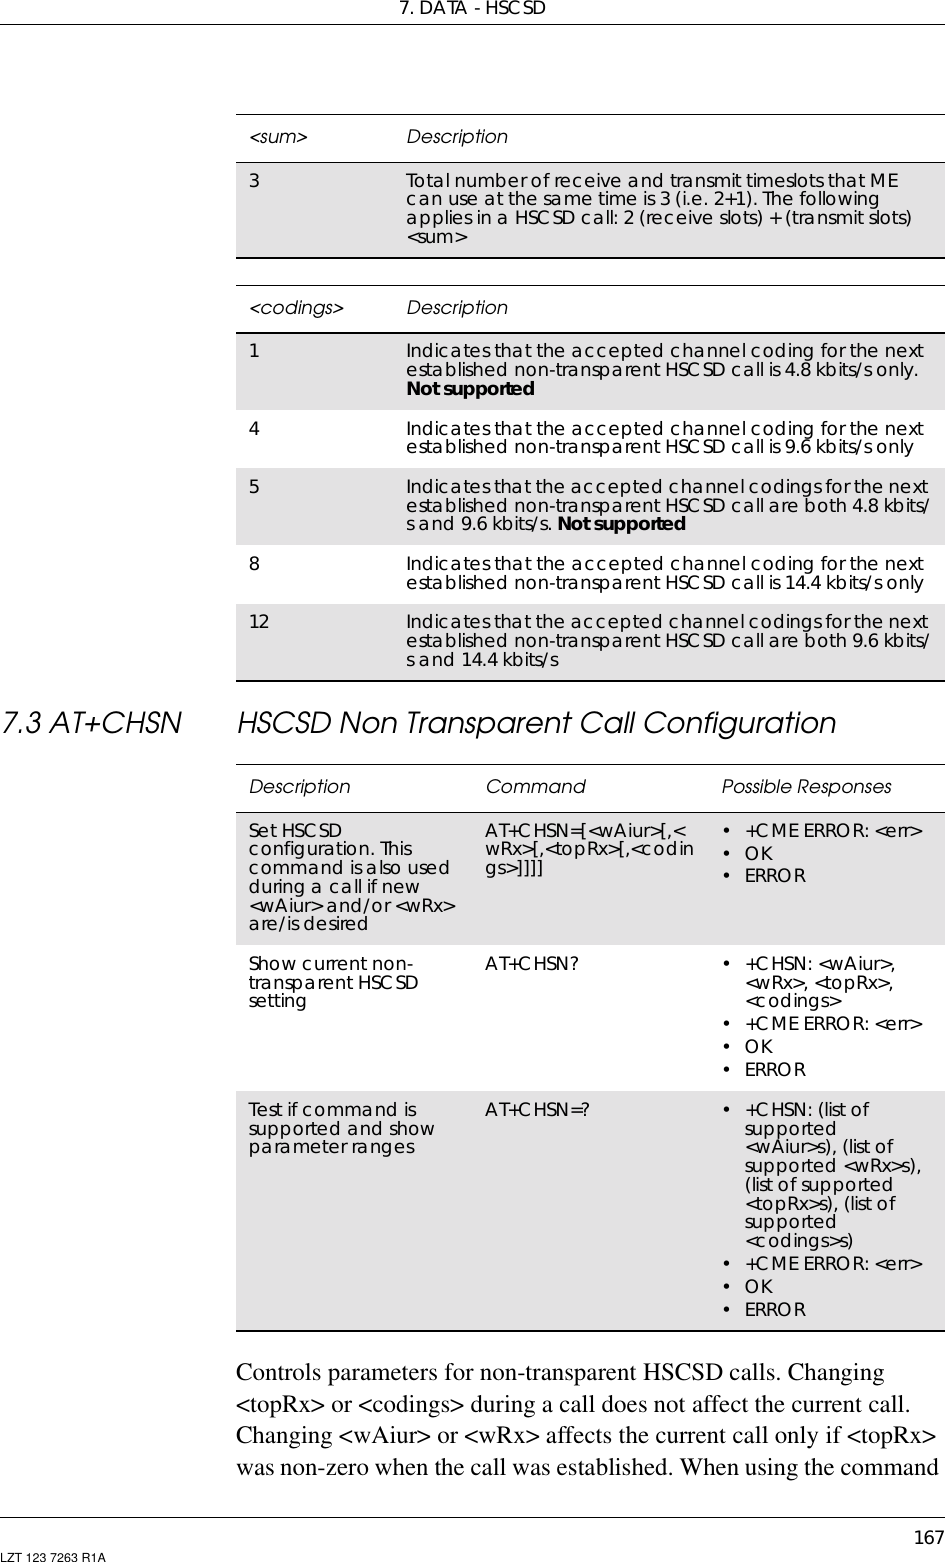 7. DATA - HSCSD167LZT 123 7263 R1A7.3 AT+CHSN HSCSD Non Transparent Call ConfigurationControls parameters for non-transparent HSCSD calls. Changing&lt;topRx&gt; or &lt;codings&gt; during a call does not affect the current call.Changing &lt;wAiur&gt; or &lt;wRx&gt; affects the current call only if &lt;topRx&gt;was non-zero when the call was established. When using the command&lt;sum&gt; Description3Total number of receive and transmit timeslots that MEcanuseatthesametimeis3(i.e.2+1).Thefollowingapplies in a HSCSD call: 2 (receive slots) + (transmit slots)&lt;sum&gt;&lt;codings&gt; Description1Indicates that the accepted channel coding for the nextestablished non-transparent HSCSD call is 4.8 kbits/s only.Not supported4Indicates that the accepted channel coding for the nextestablished non-transparent HSCSD call is 9.6 kbits/s only5Indicates that the accepted channel codings for the nextestablished non-transparent HSCSD call are both 4.8 kbits/sand9.6kbits/s.Not supported8Indicates that the accepted channel coding for the nextestablished non-transparent HSCSD call is 14.4 kbits/s only12 Indicates that the accepted channel codings for the nextestablished non-transparent HSCSD call are both 9.6 kbits/sand14.4kbits/sDescription Command Possible ResponsesSet HSCSDconfiguration. Thiscommand is also usedduring a call if new&lt;wAiur&gt; and/or &lt;wRx&gt;are/is desiredAT+CHSN=[&lt;wAiur&gt;[,&lt;wRx&gt;[,&lt;topRx&gt;[,&lt;codings&gt;]]]]•+CMEERROR:&lt;err&gt;•OK•ERRORShow current non-transparent HSCSDsettingAT+CHSN? •+CHSN:&lt;wAiur&gt;,&lt;wRx&gt;, &lt;topRx&gt;,&lt;codings&gt;•+CMEERROR:&lt;err&gt;•OK•ERRORTest if command issupported and showparameter rangesAT+CHSN=? •+CHSN:(listofsupported&lt;wAiur&gt;s), (list ofsupported &lt;wRx&gt;s),(list of supported&lt;topRx&gt;s), (list ofsupported&lt;codings&gt;s)•+CMEERROR:&lt;err&gt;•OK•ERROR